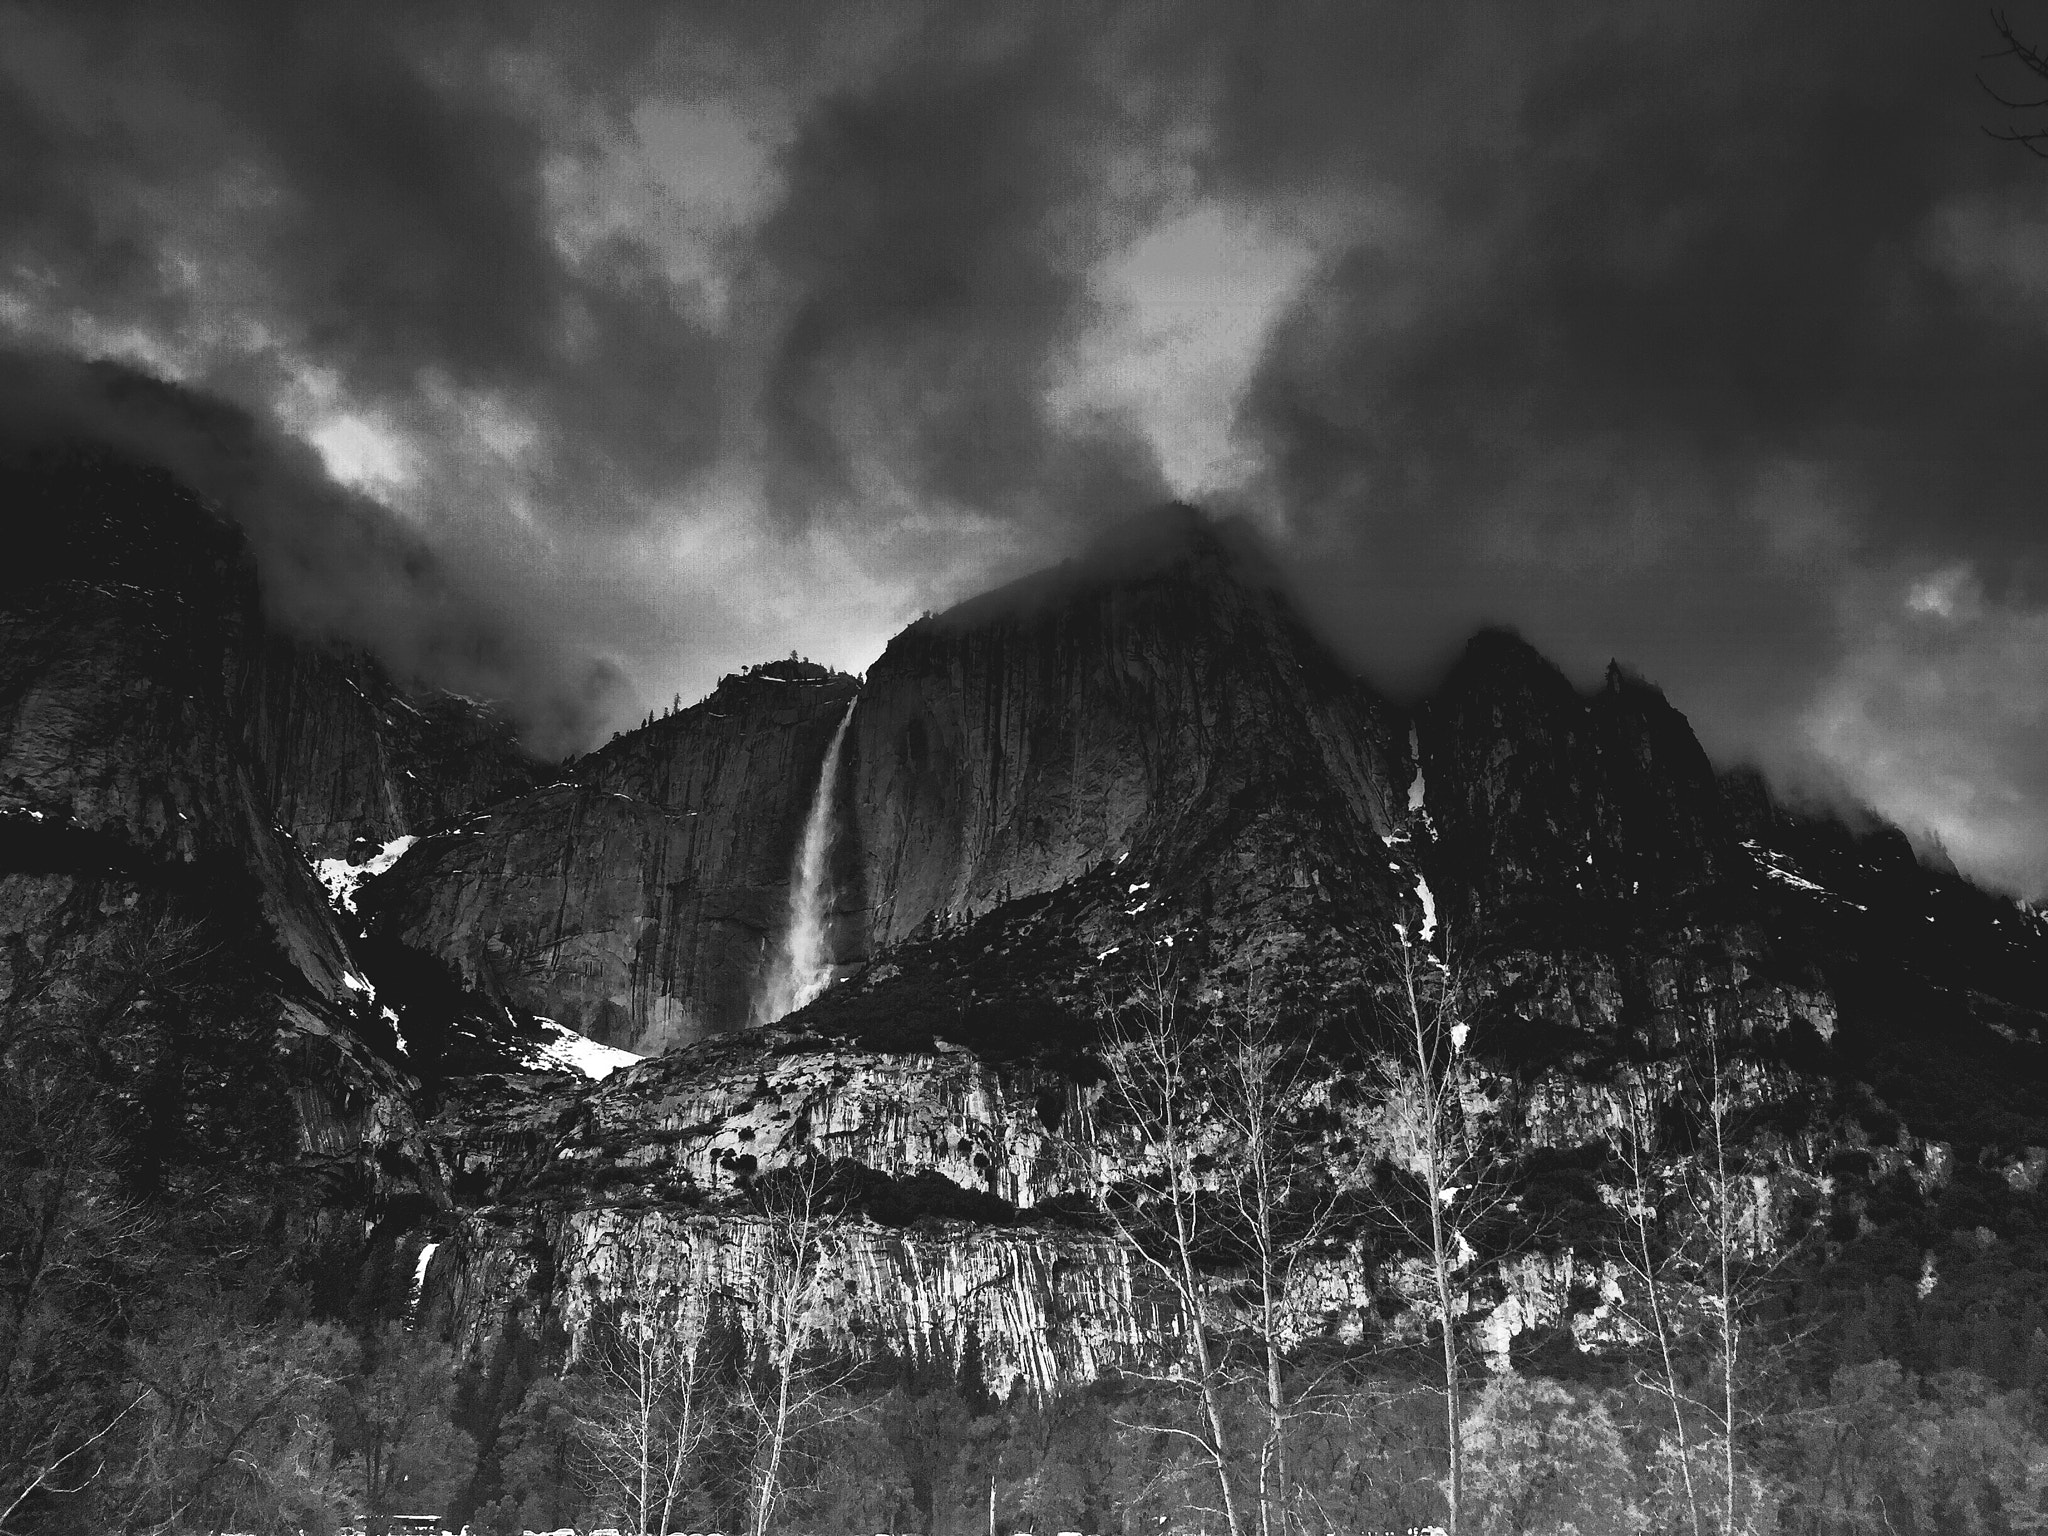 Jag.gr 645 PRO Mk III for Apple iPhone 6 sample photo. Upper yosemite falls at sunset. photography